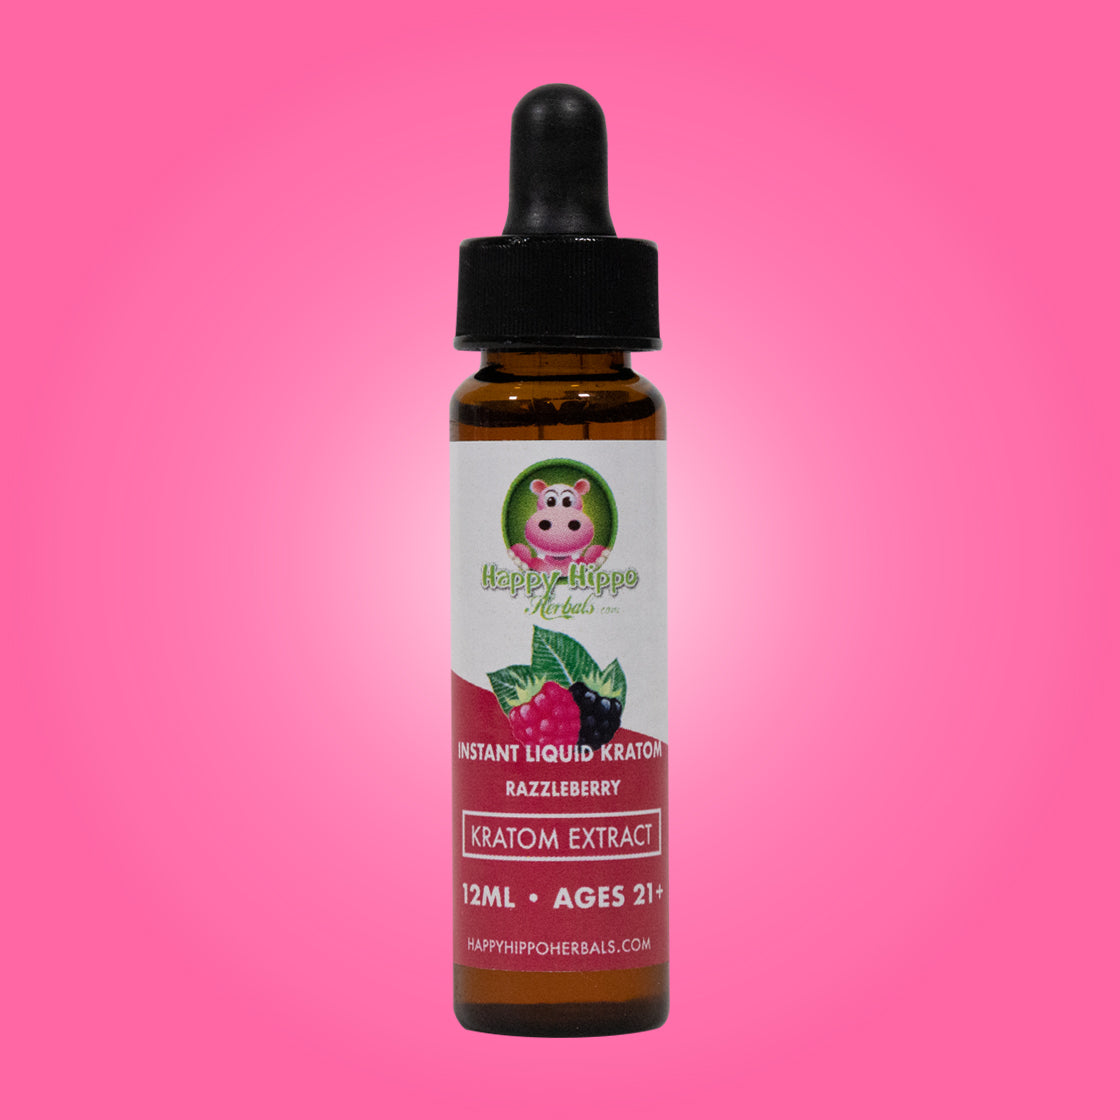 Product Image depicting Instant Kratom Extract in dropper bottle - Razzleberry Flavor